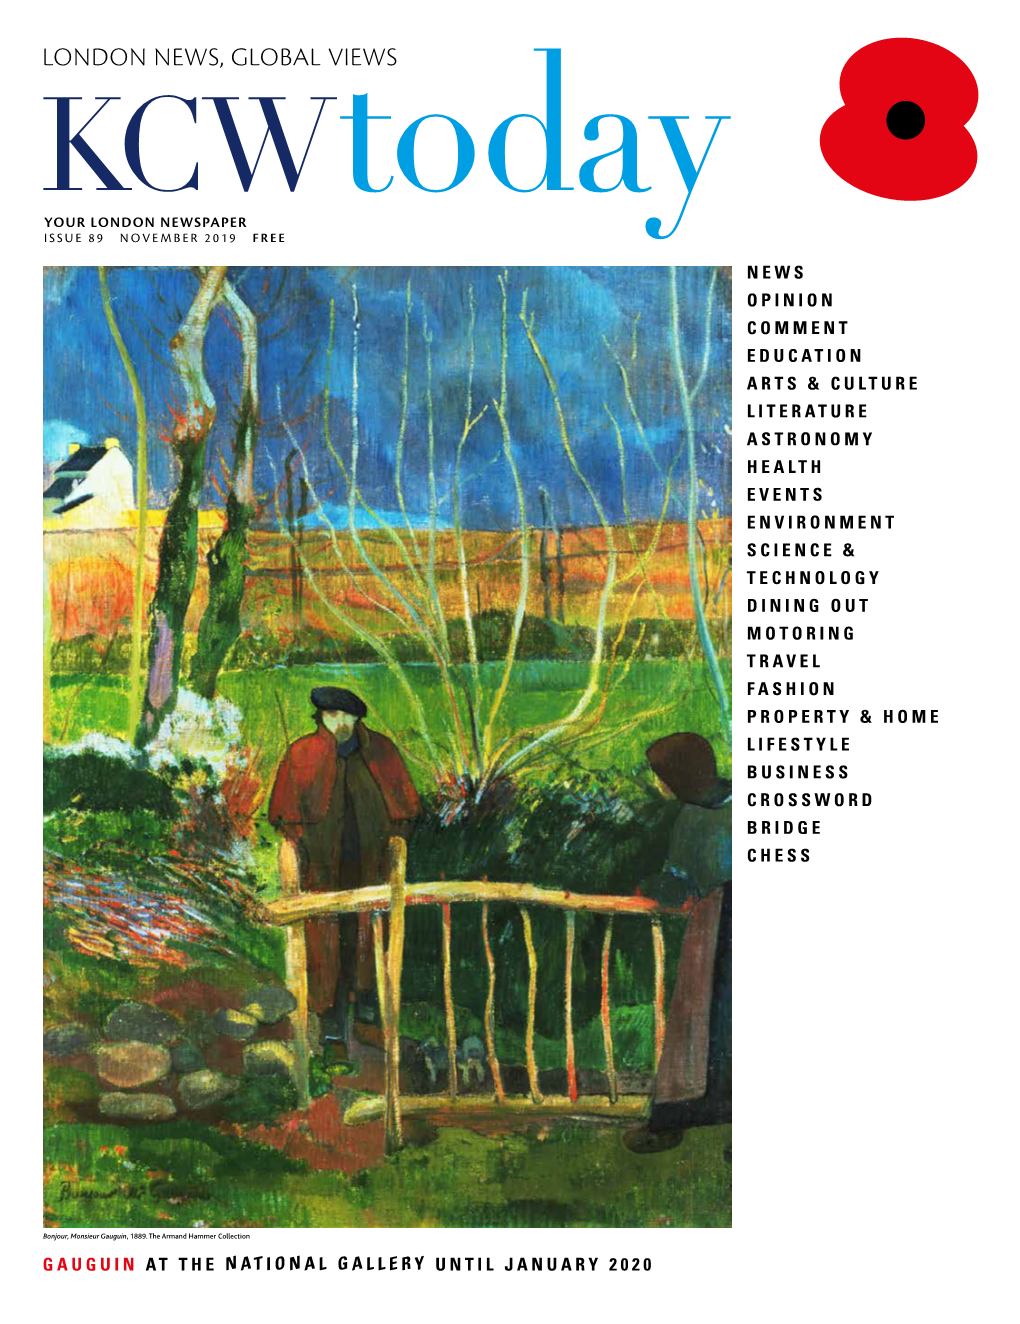 LONDON NEWS, GLOBAL VIEWS KCW YOUR LONDON NEWSPAPER to Ay ISSUE 89 NOVEMBER 2019 FREE